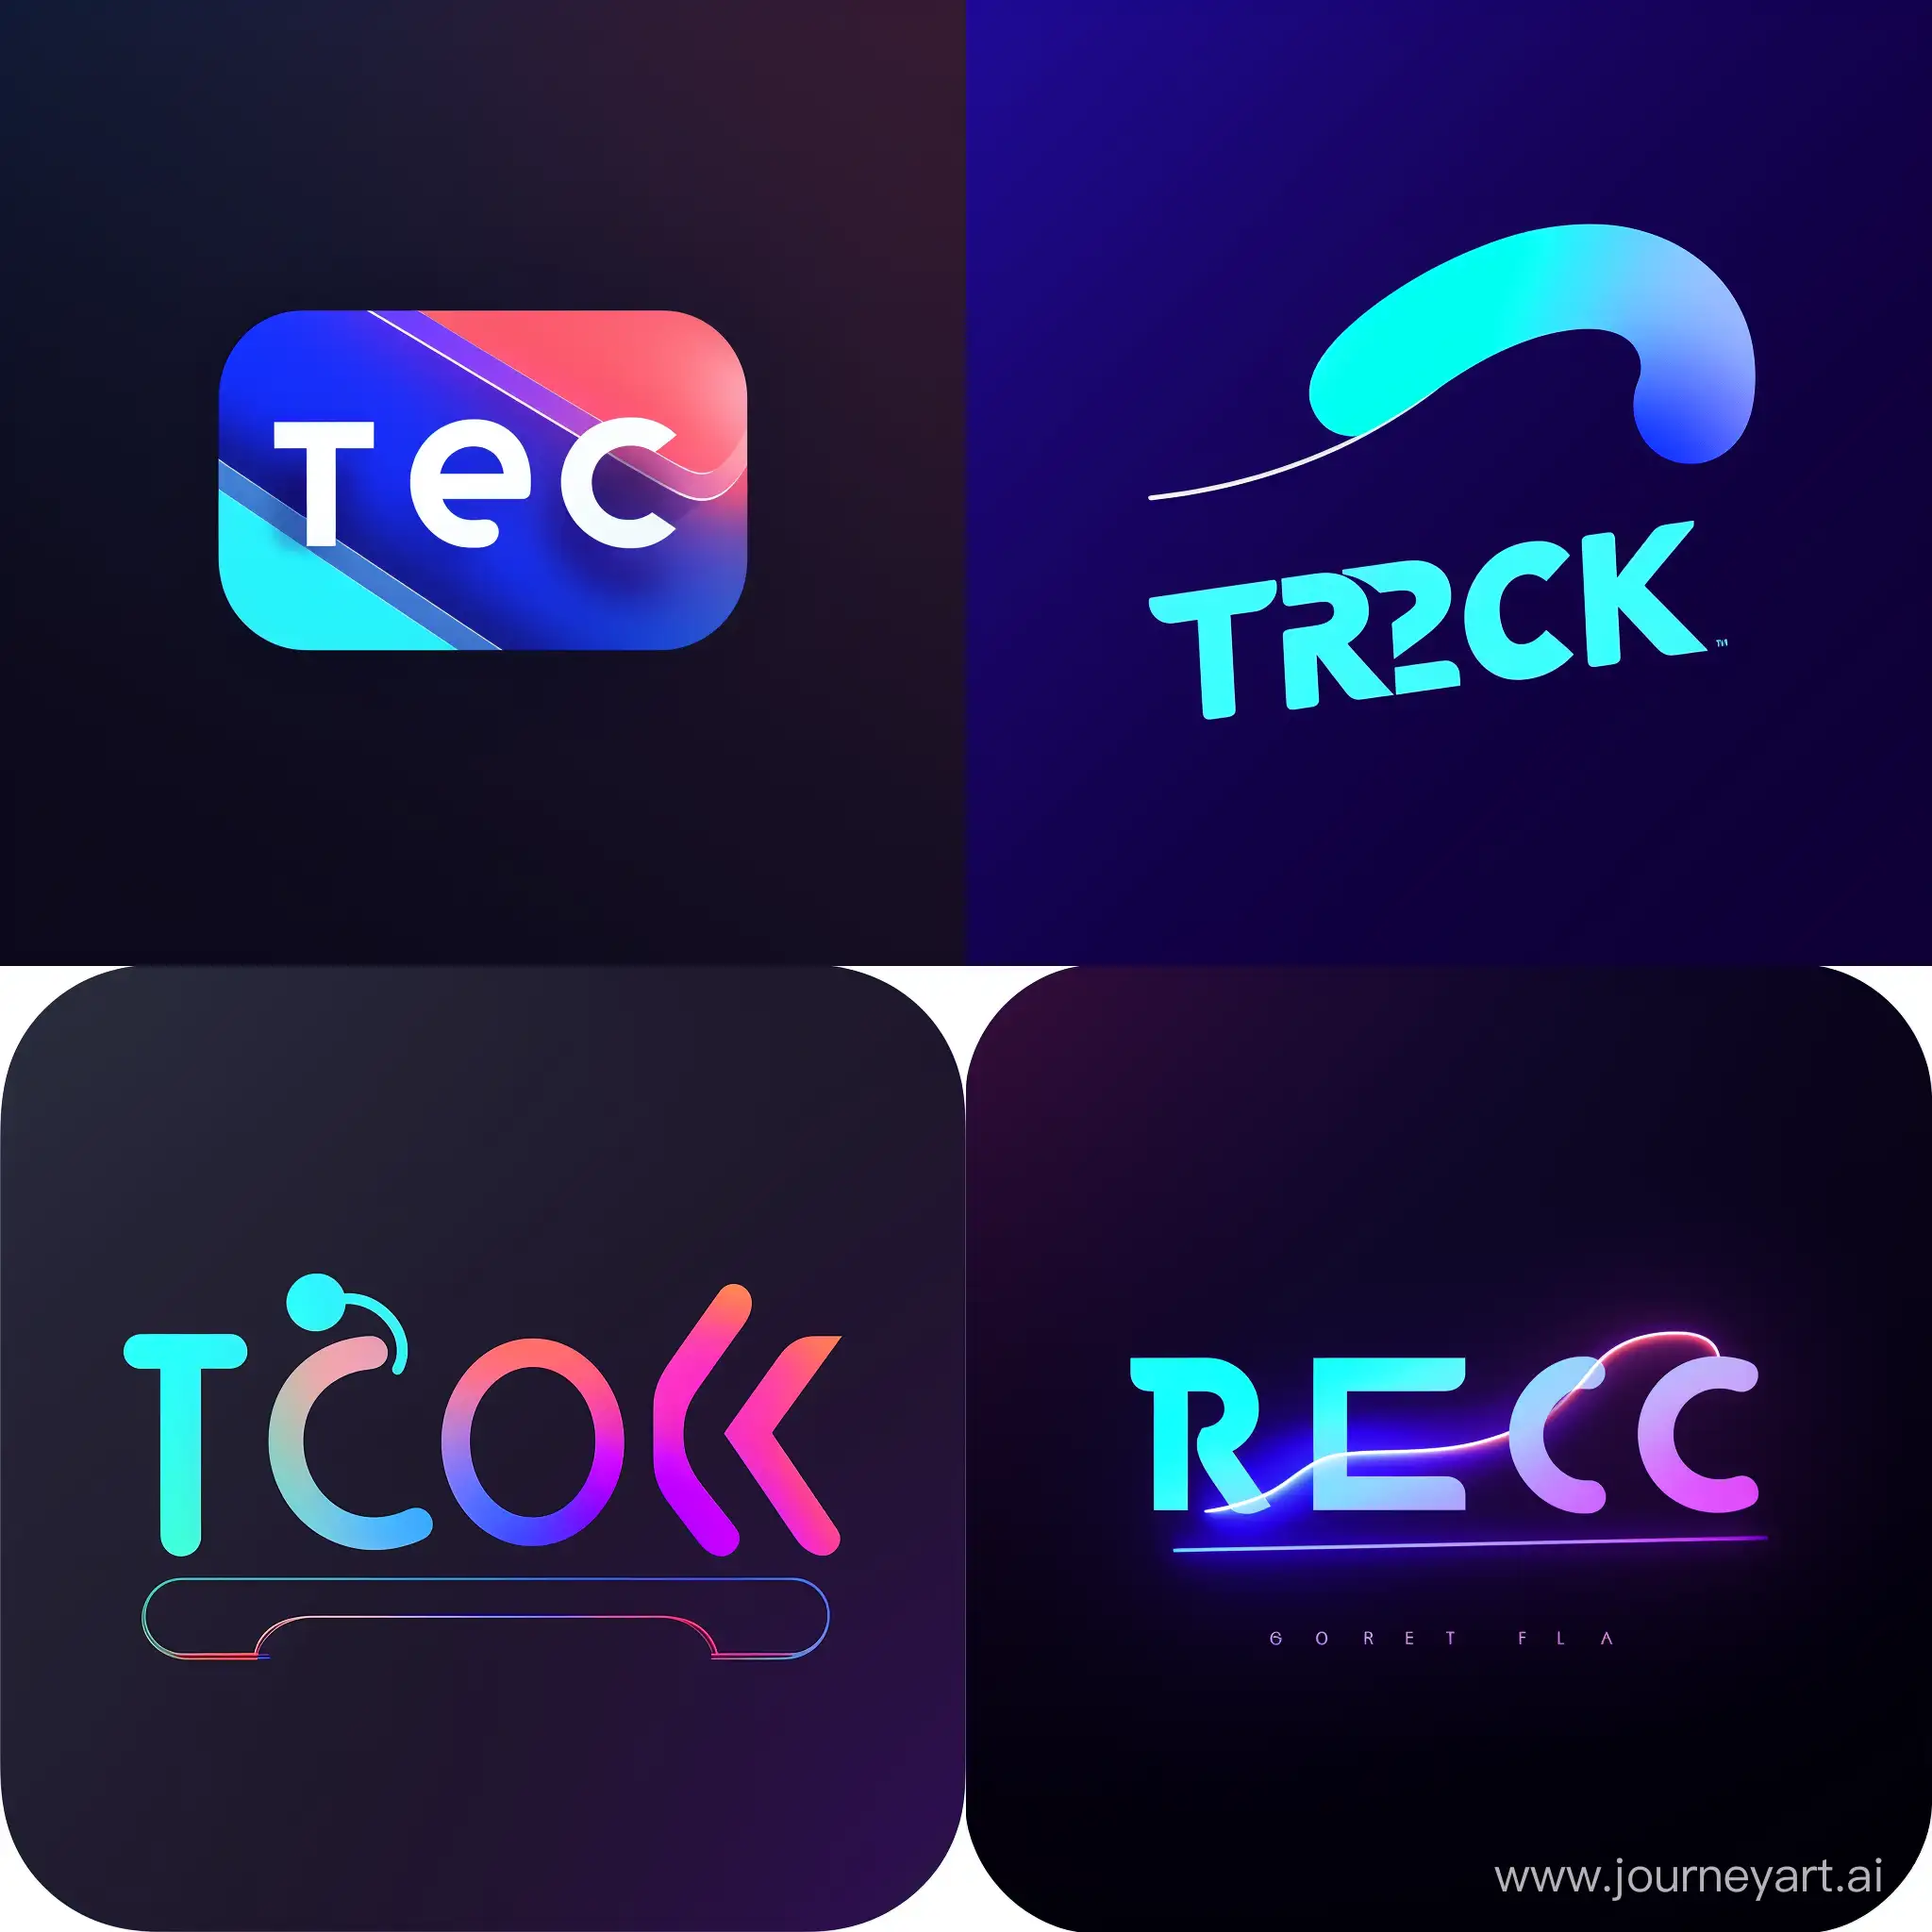 Imagine that you are creating a logo for an app called Track, which is an AI gym trainer that helps you achieve your fitness goals.